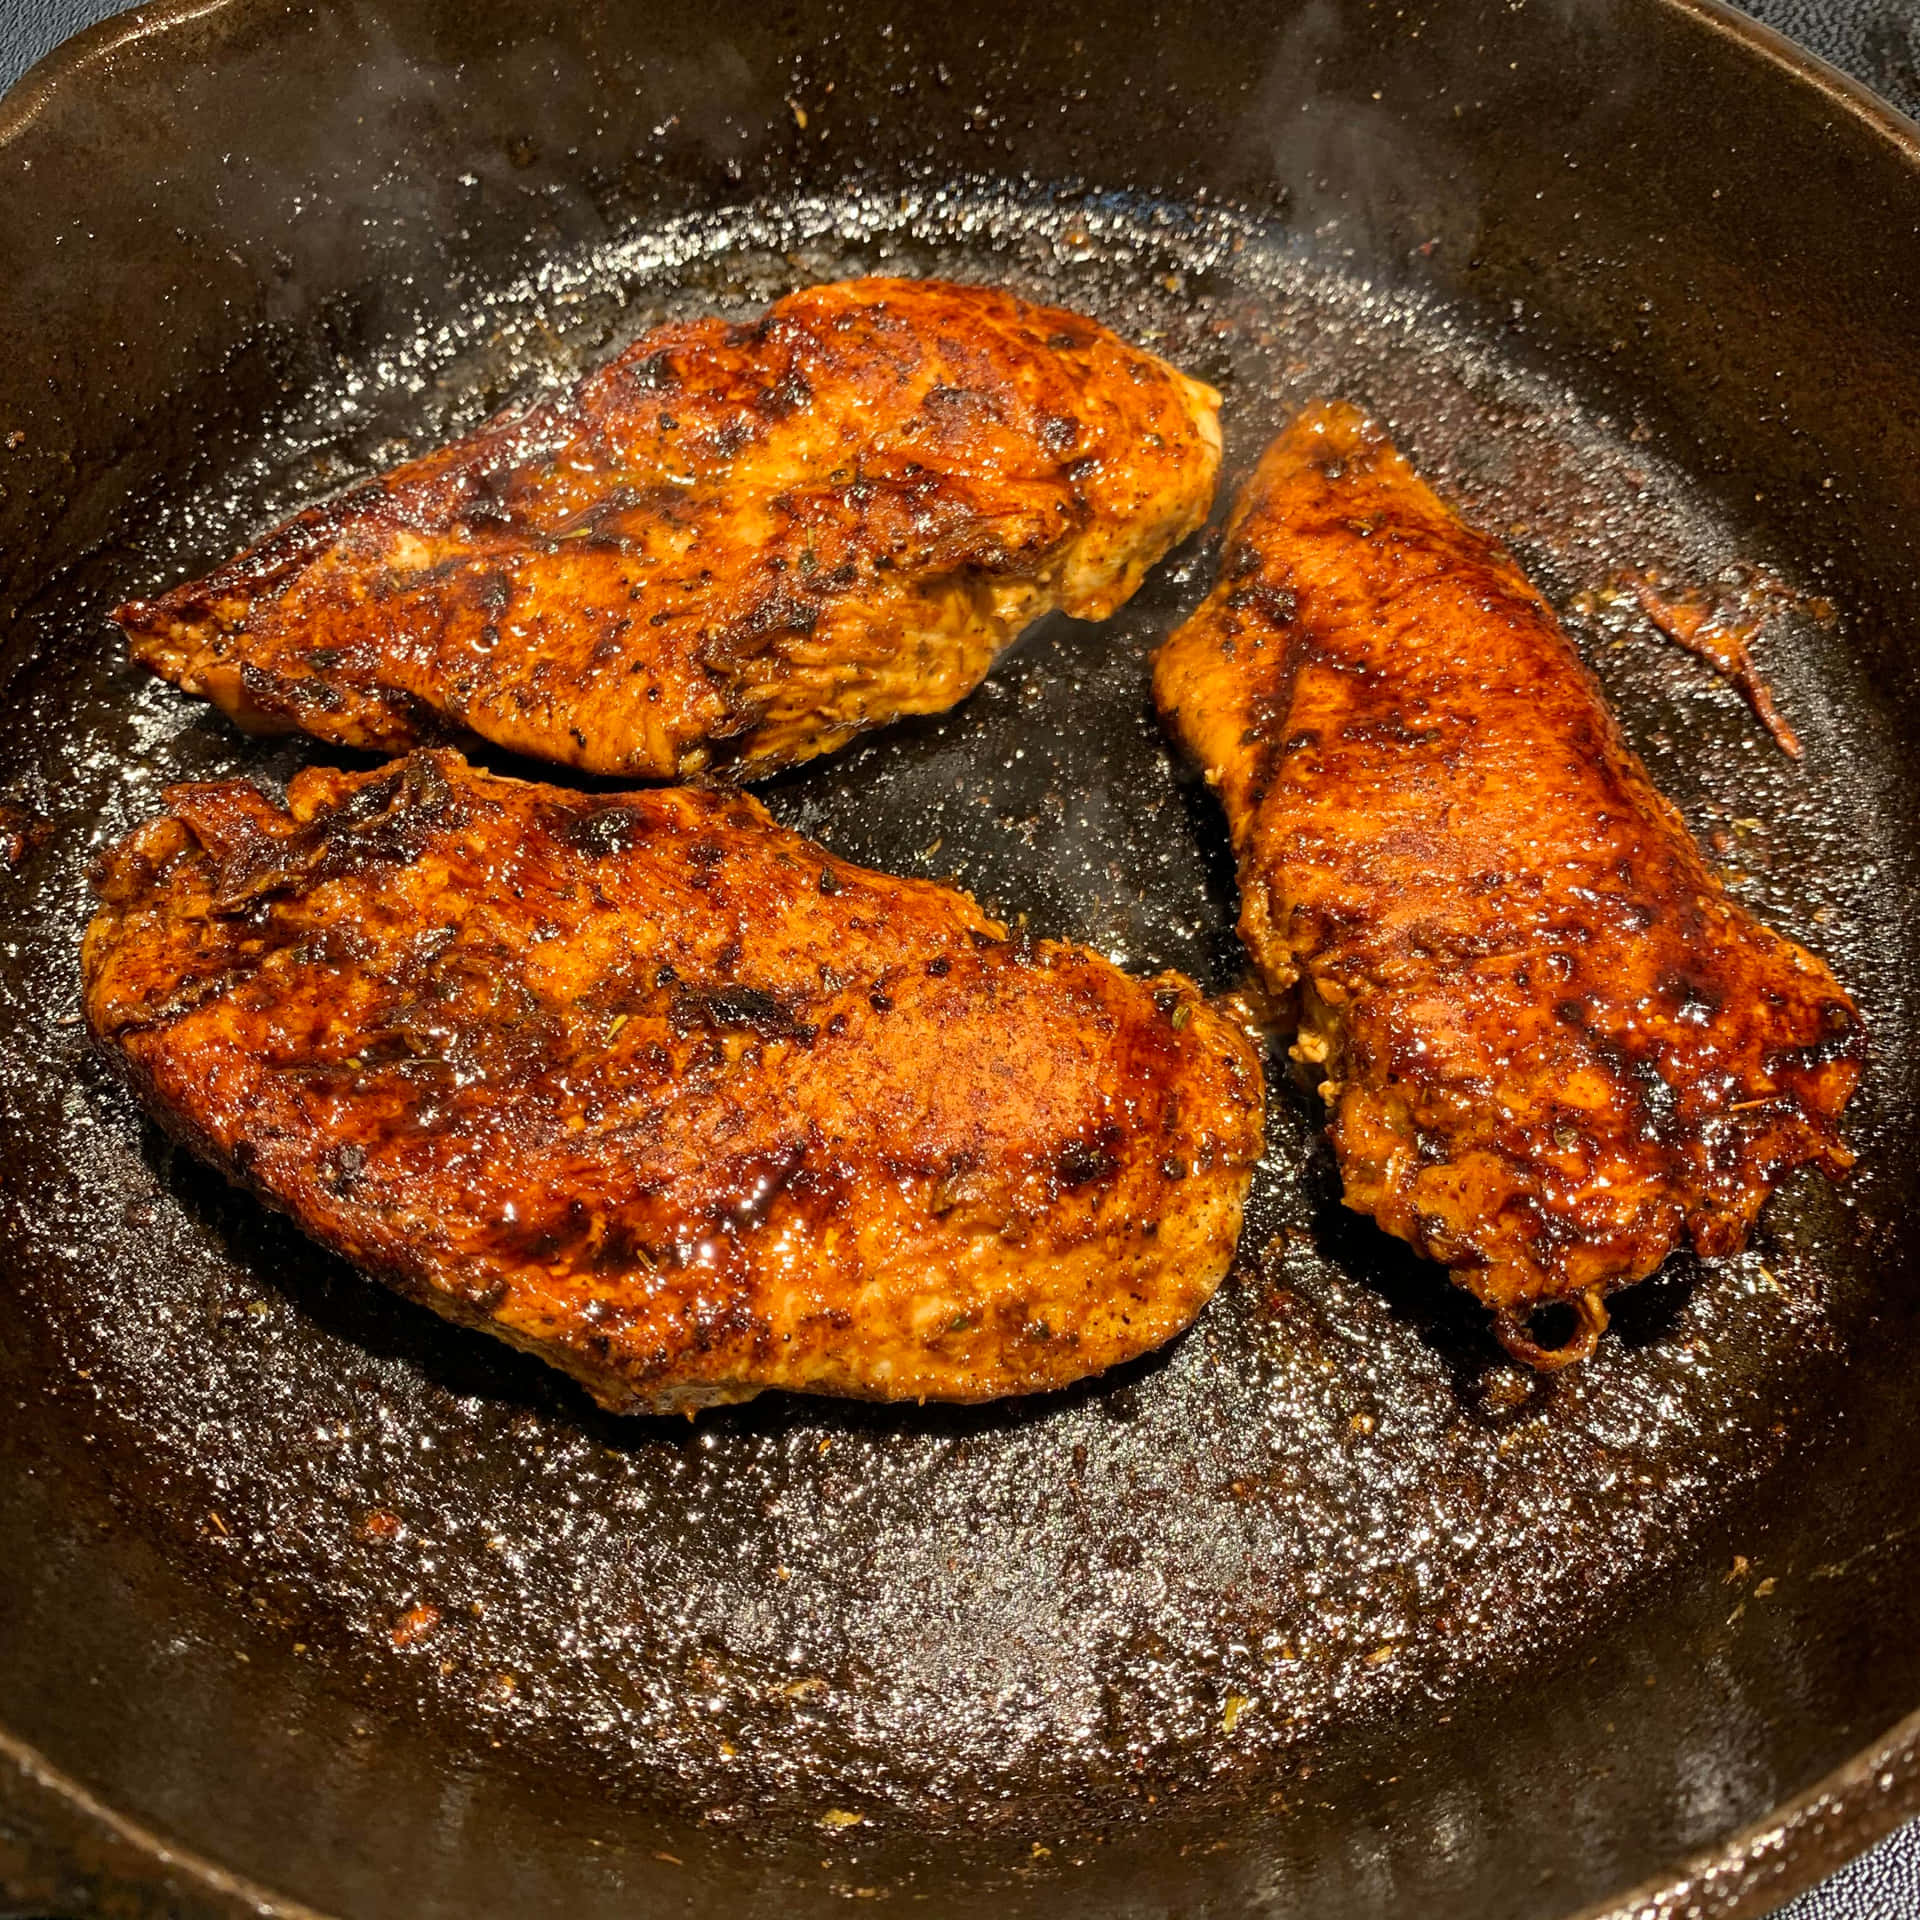 Spice up your dinner tonight with a flavorful blackened chicken dish! Wallpaper